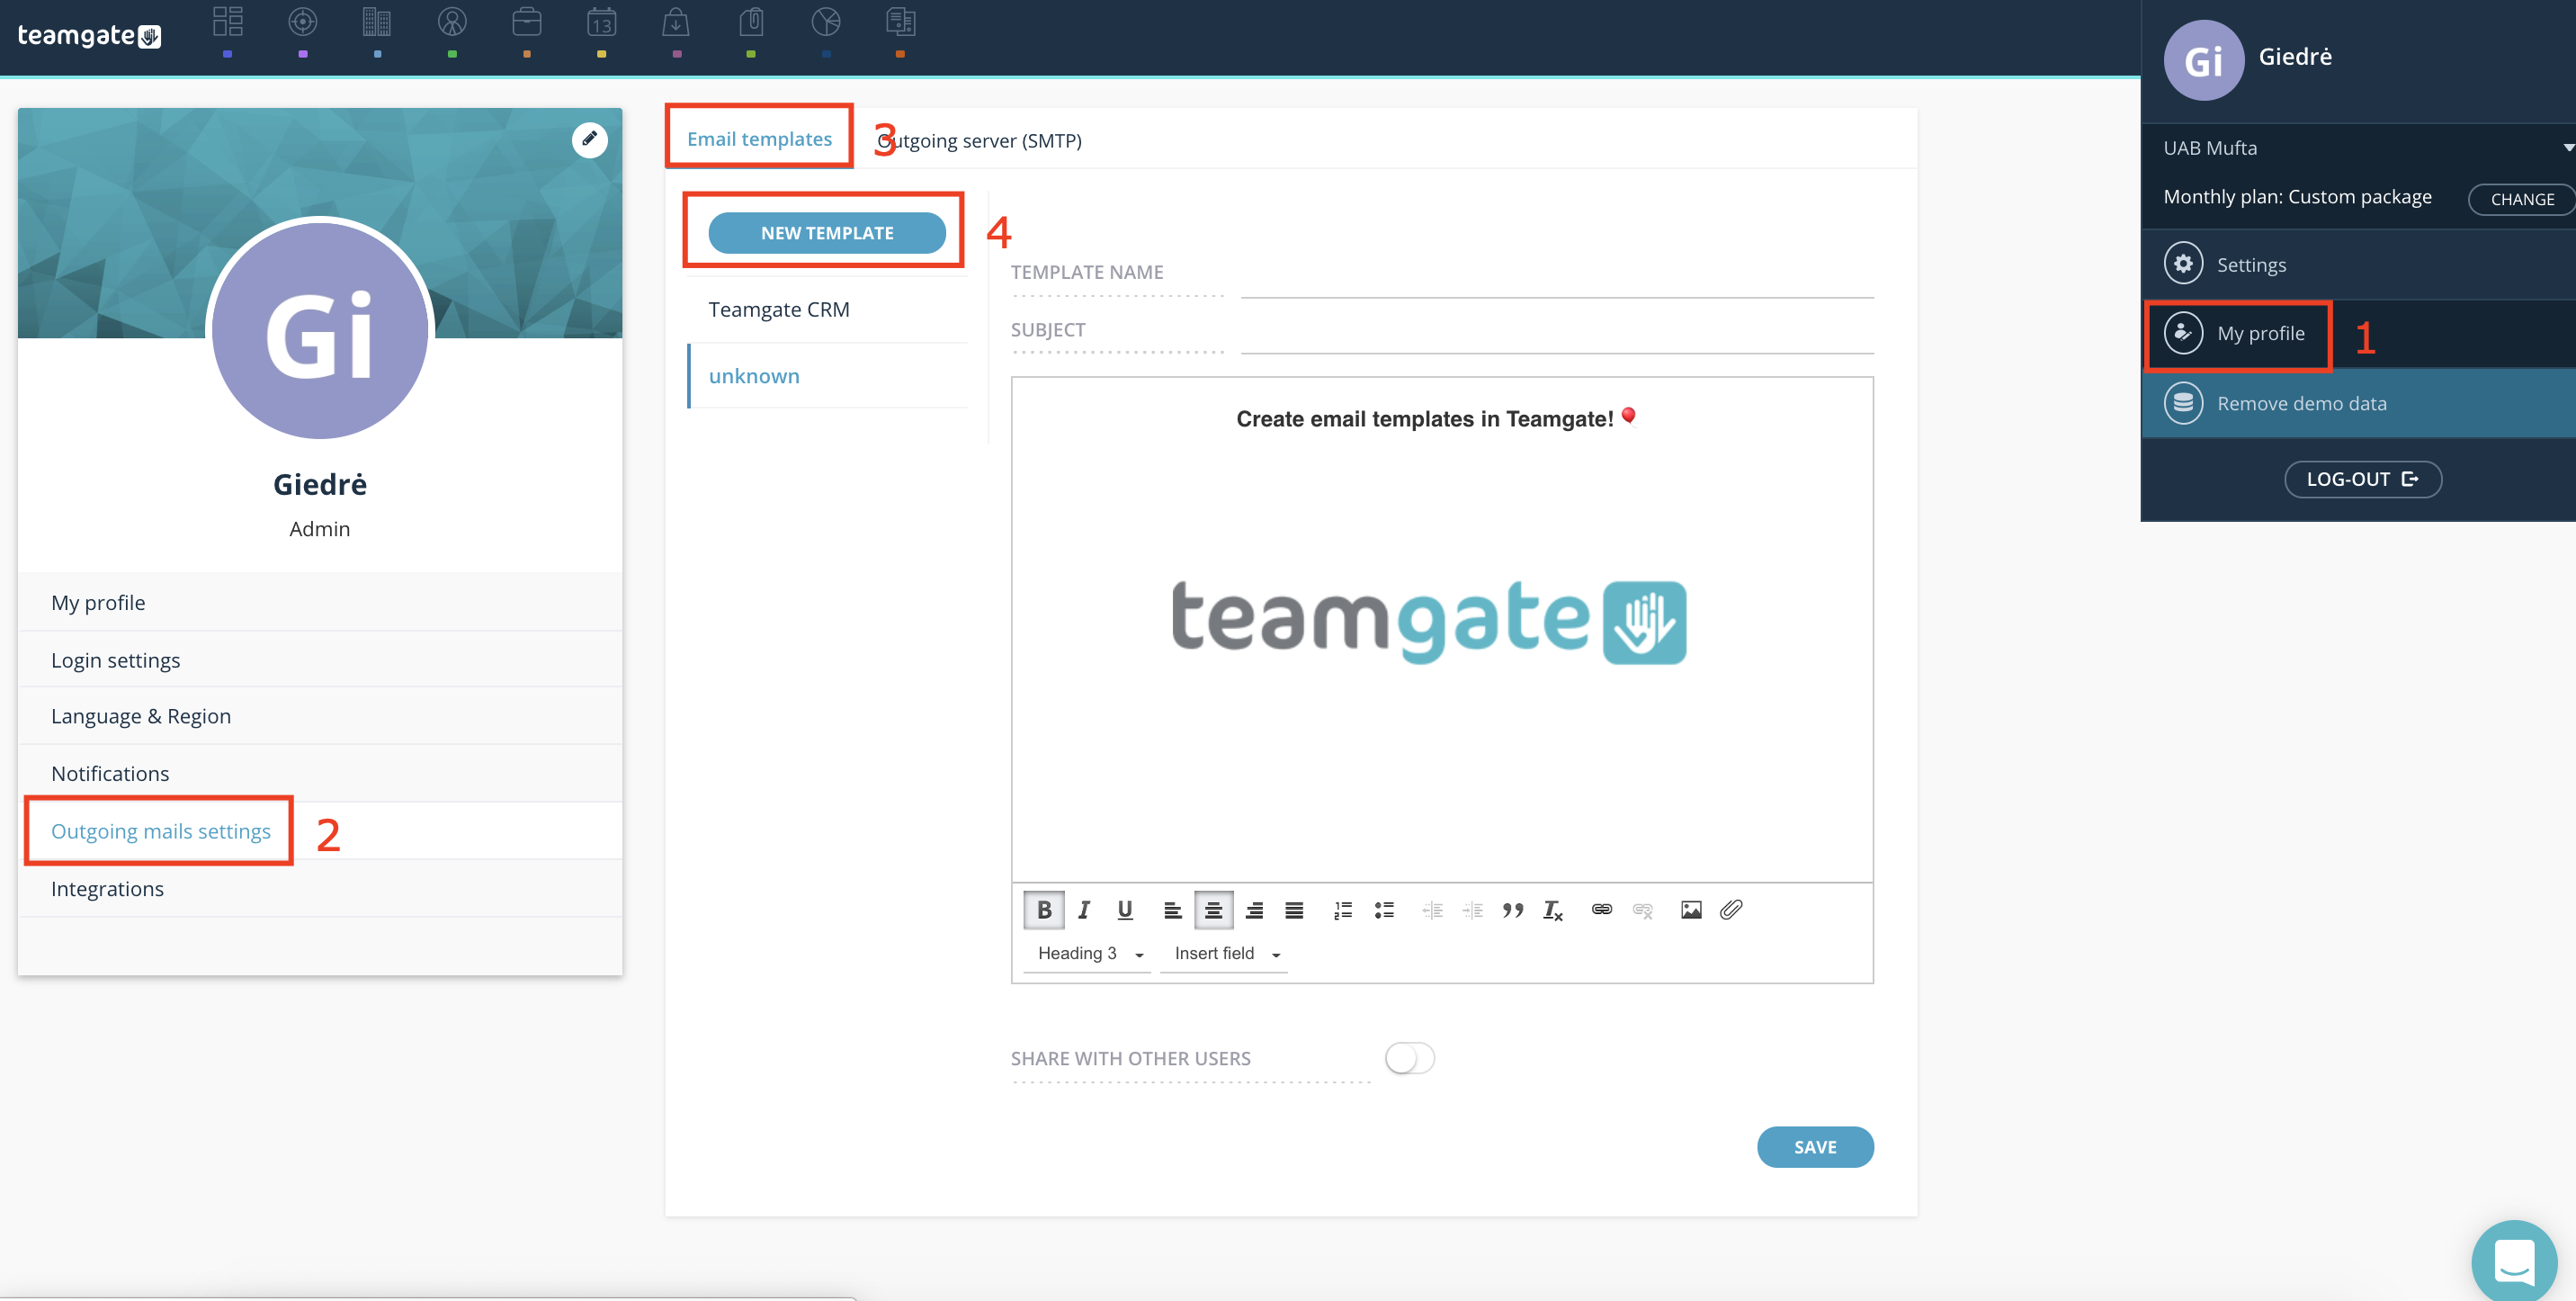 Create-email-templates-send-emails-from-Teamgate-CRM.png